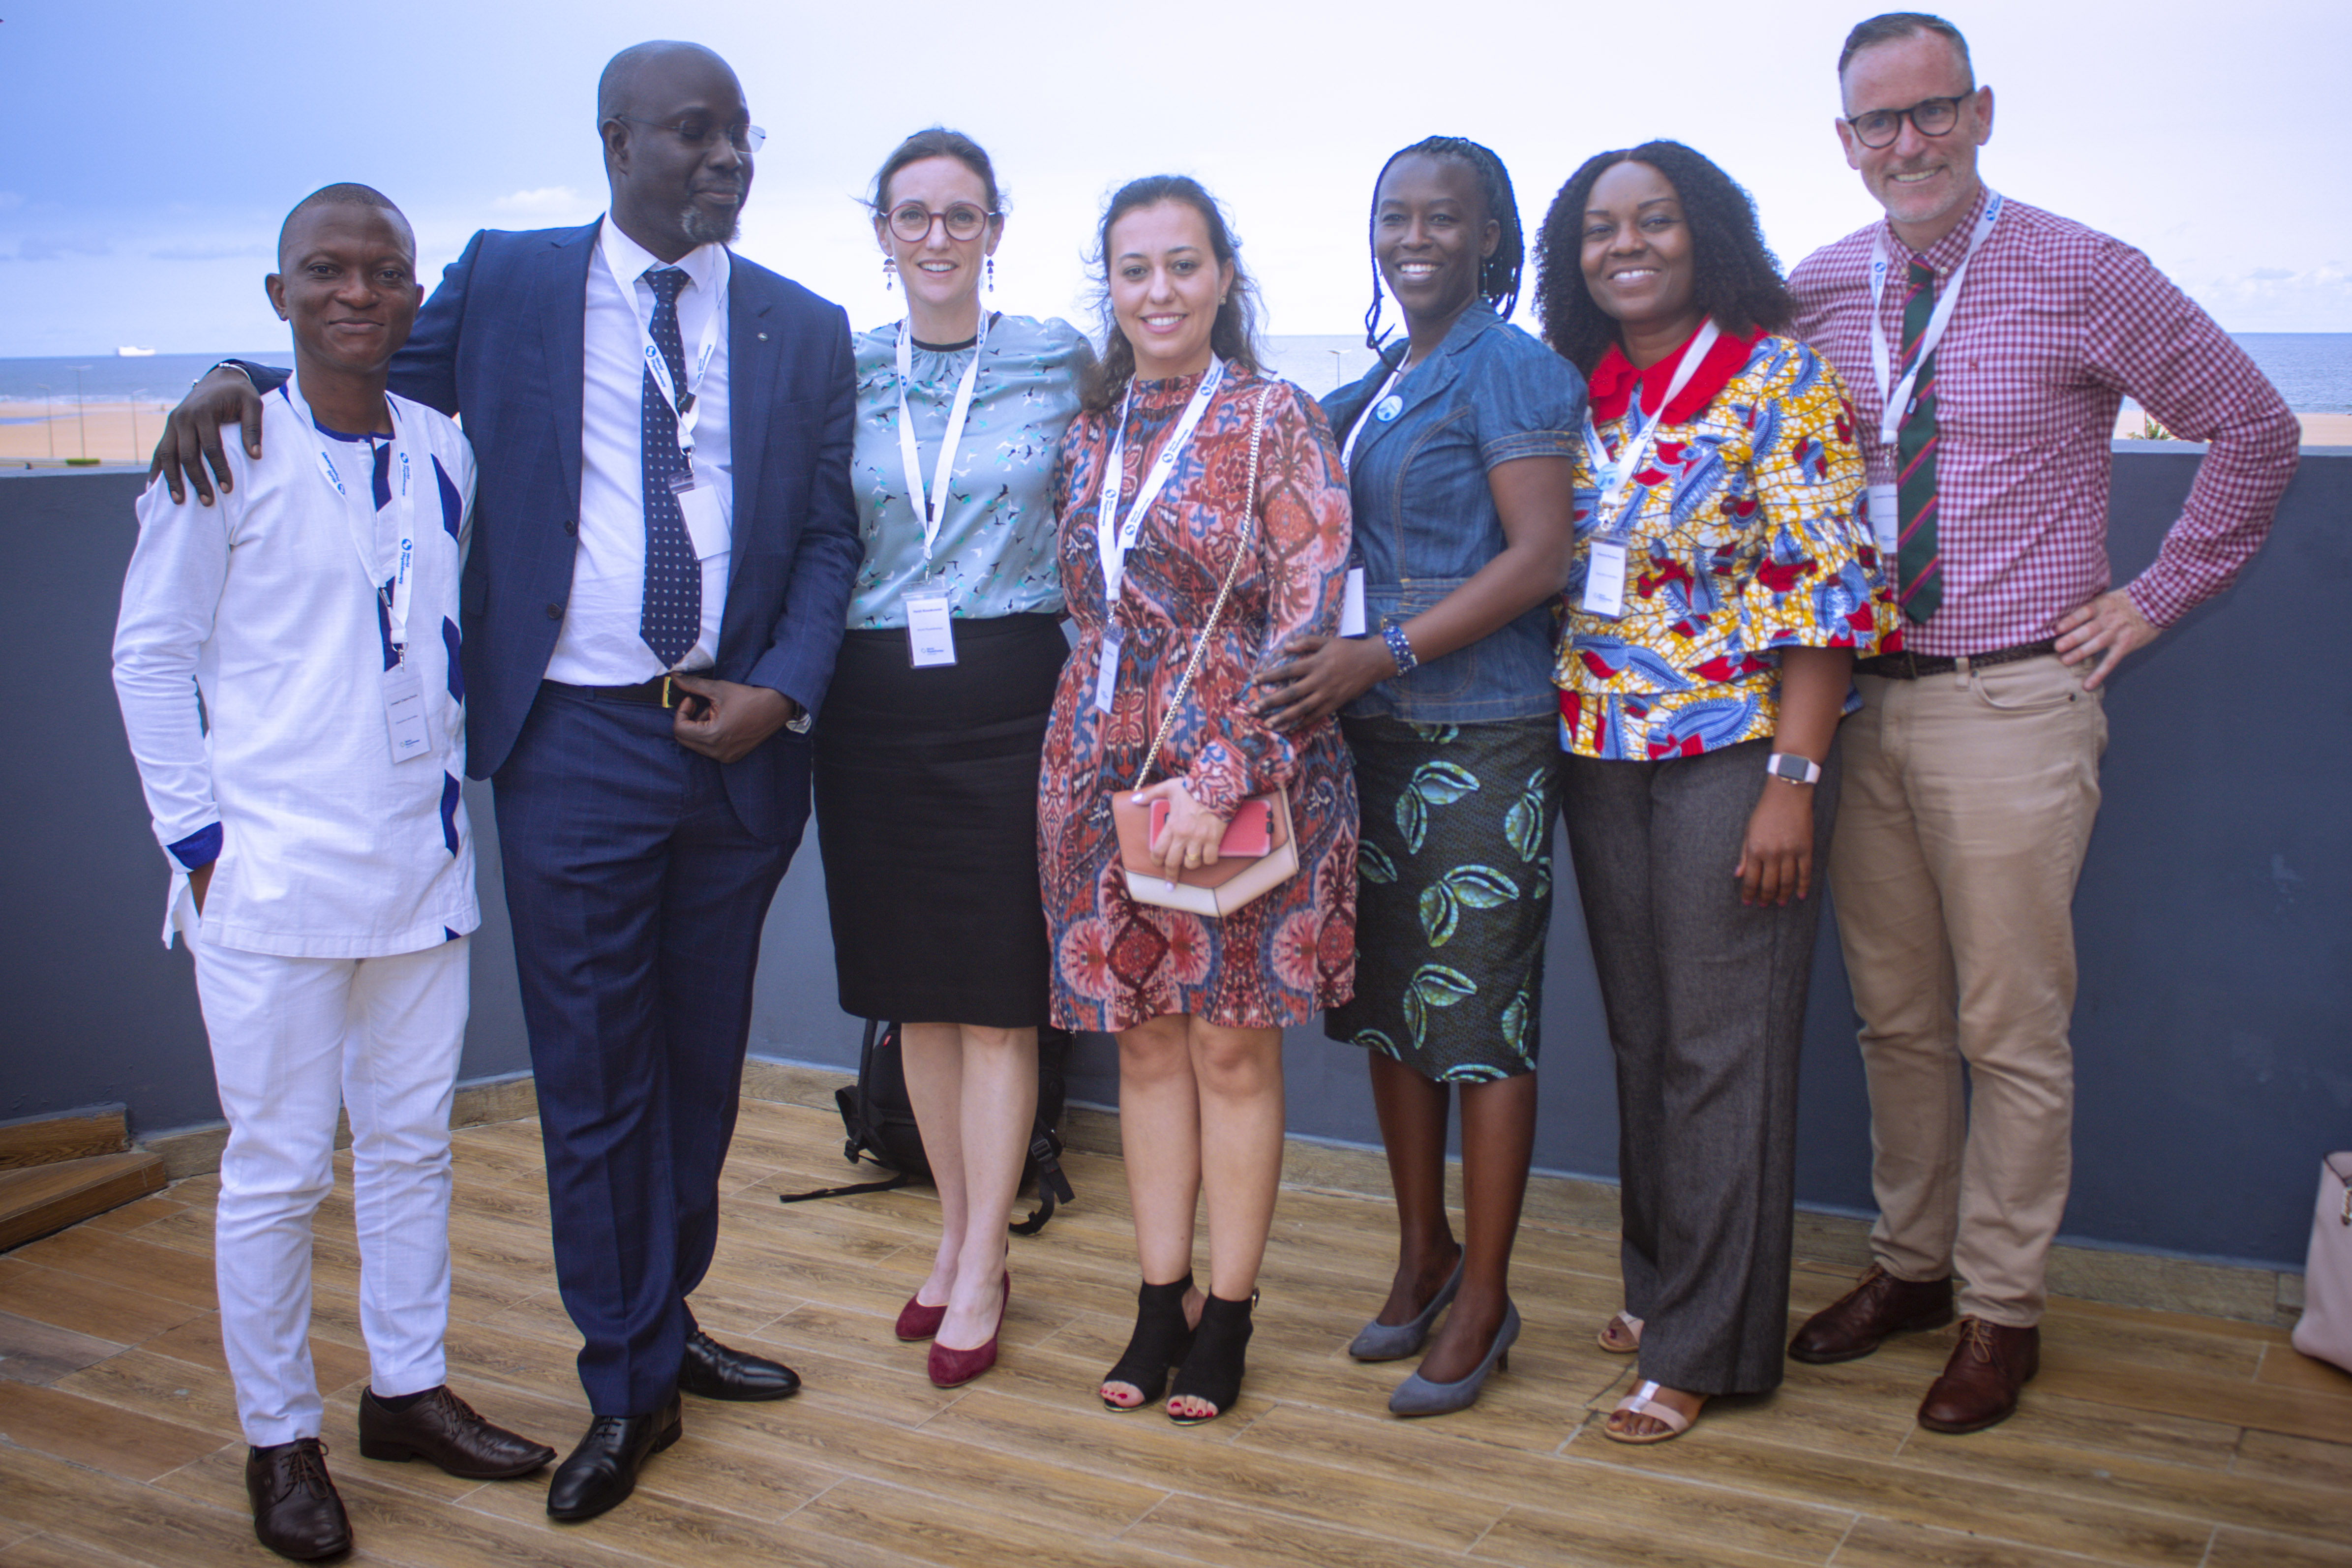 Pictured, from left: Joseph Martial Capo-Chichi, World Physiotherapy Africa region chair; Sidy Dieye, World Physiotherapy head of programmes and development; Heidi Kosakowski, World Physiotherapy head of membership; Houda Lahlou, World Physiotherapy Africa region executive committee member; Priscillah Ondoga, World Physiotherapy Africa region executive committee member; Alberta Rockson, World Physiotherapy Africa region executive committee member; Jonathon Kruger, World Physiotherapy chief executive officer